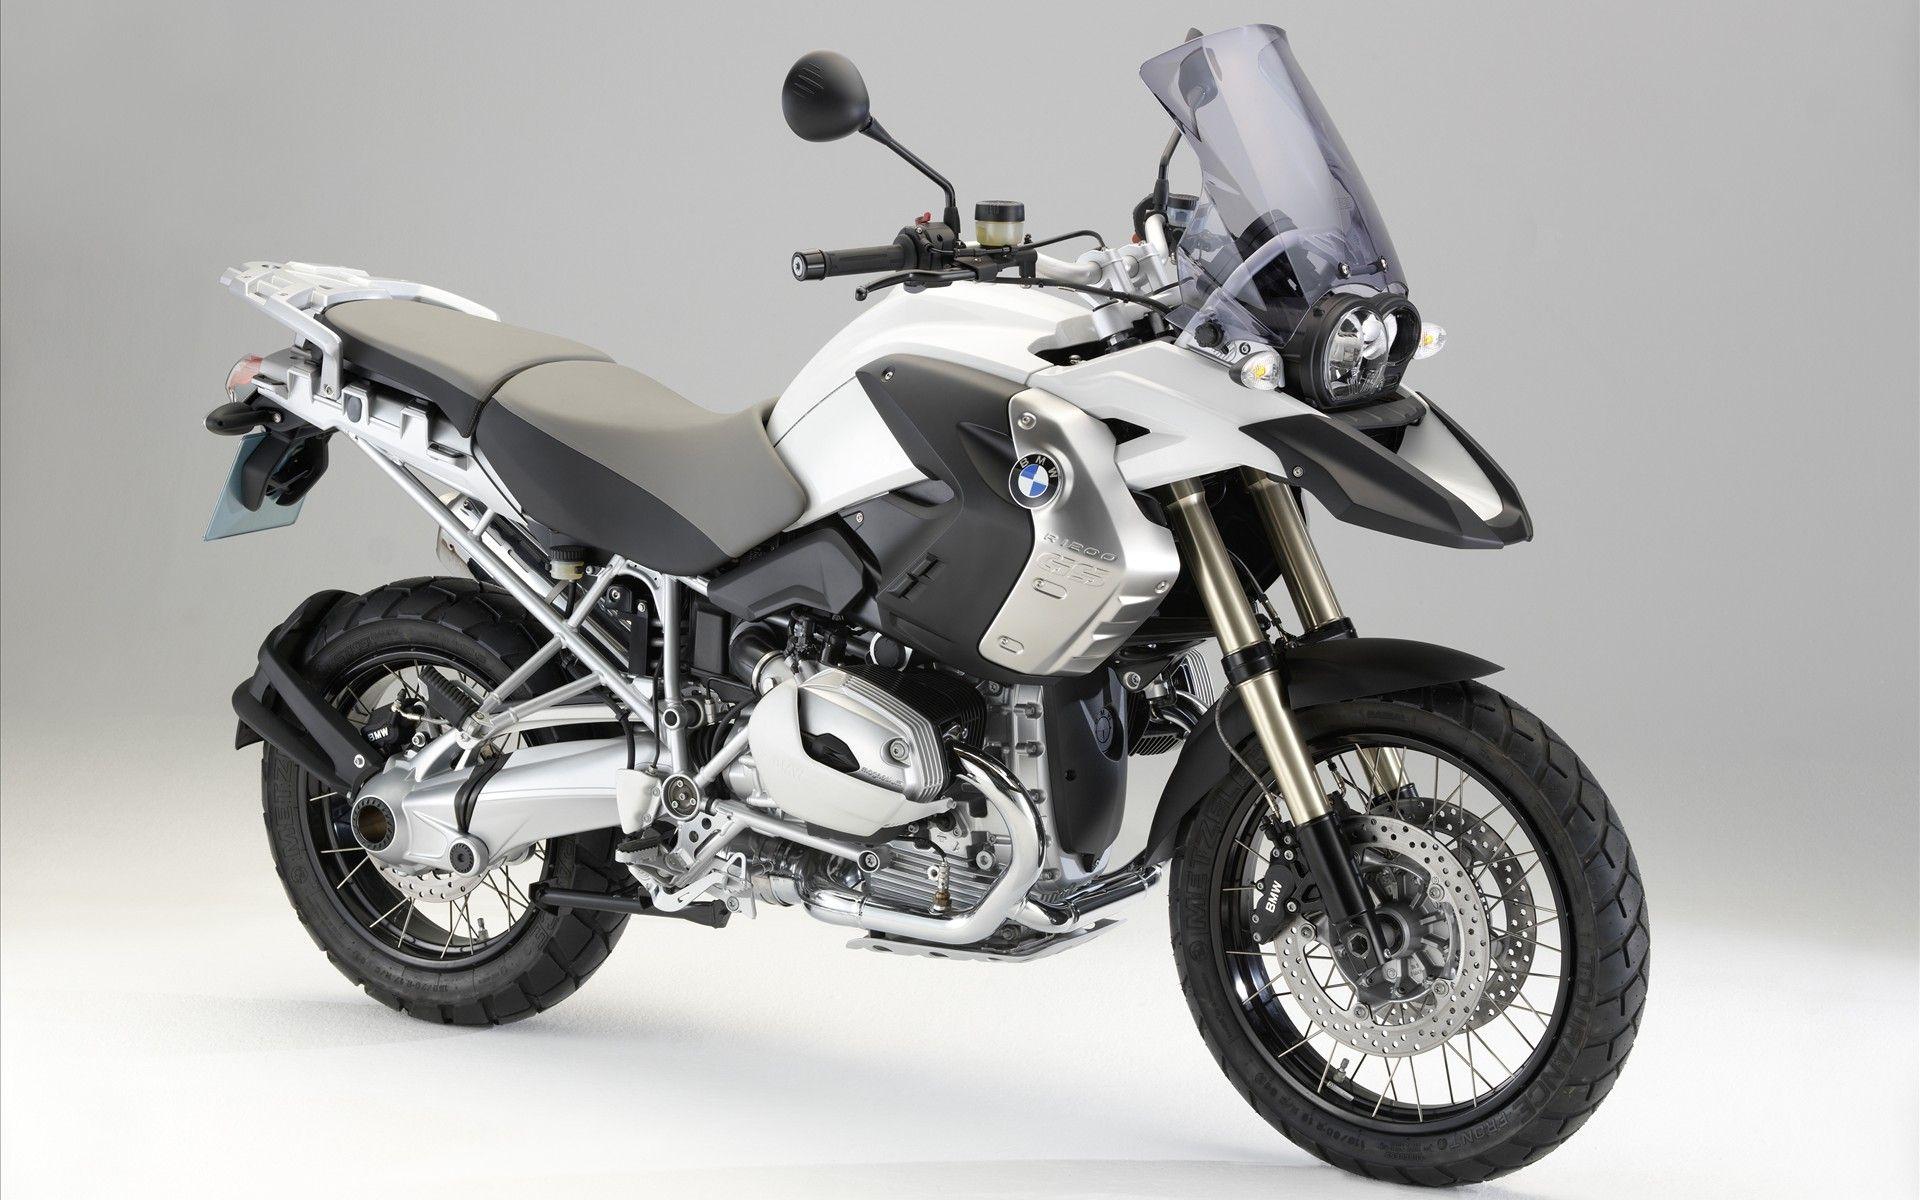 BMW New Special Edition R 1200 GS # 1920x1200. All For Desktop